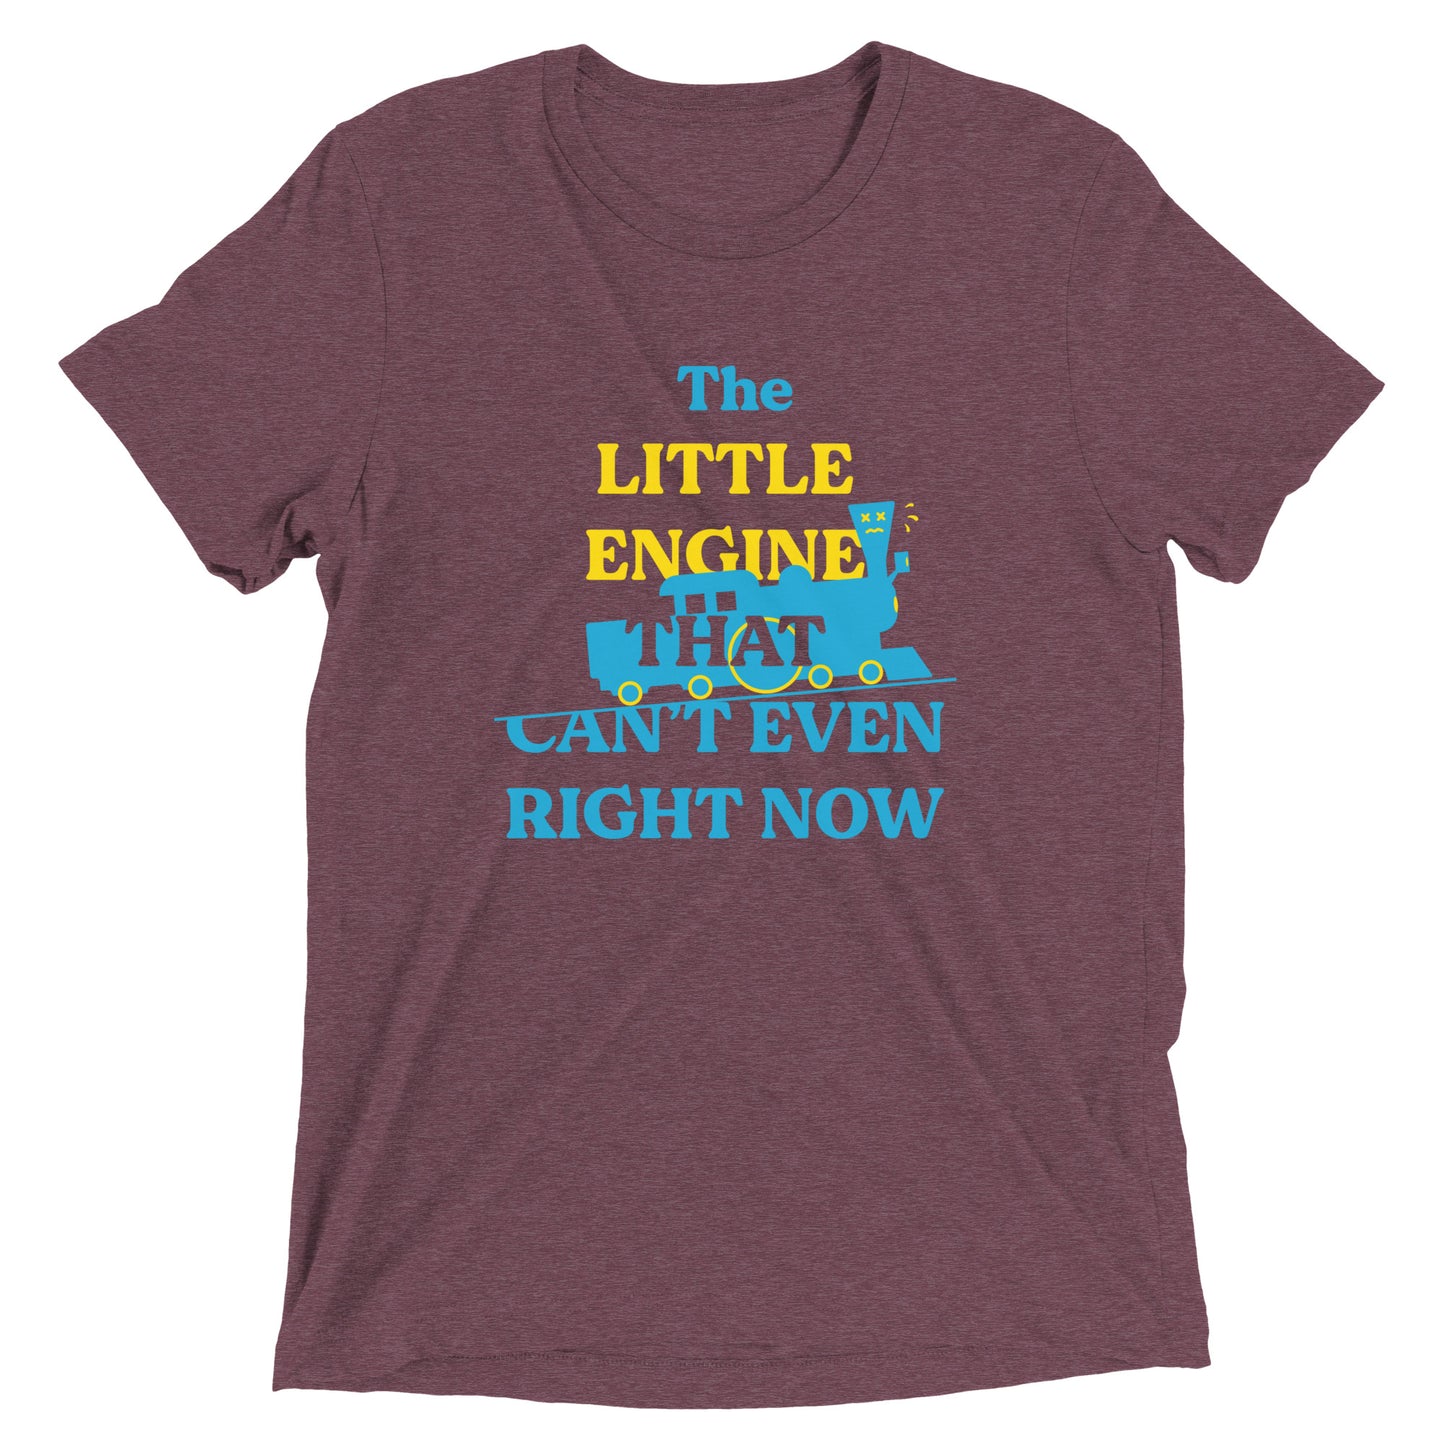 The Little Engine That Can't Even Right Now Men's Tri-Blend Tee